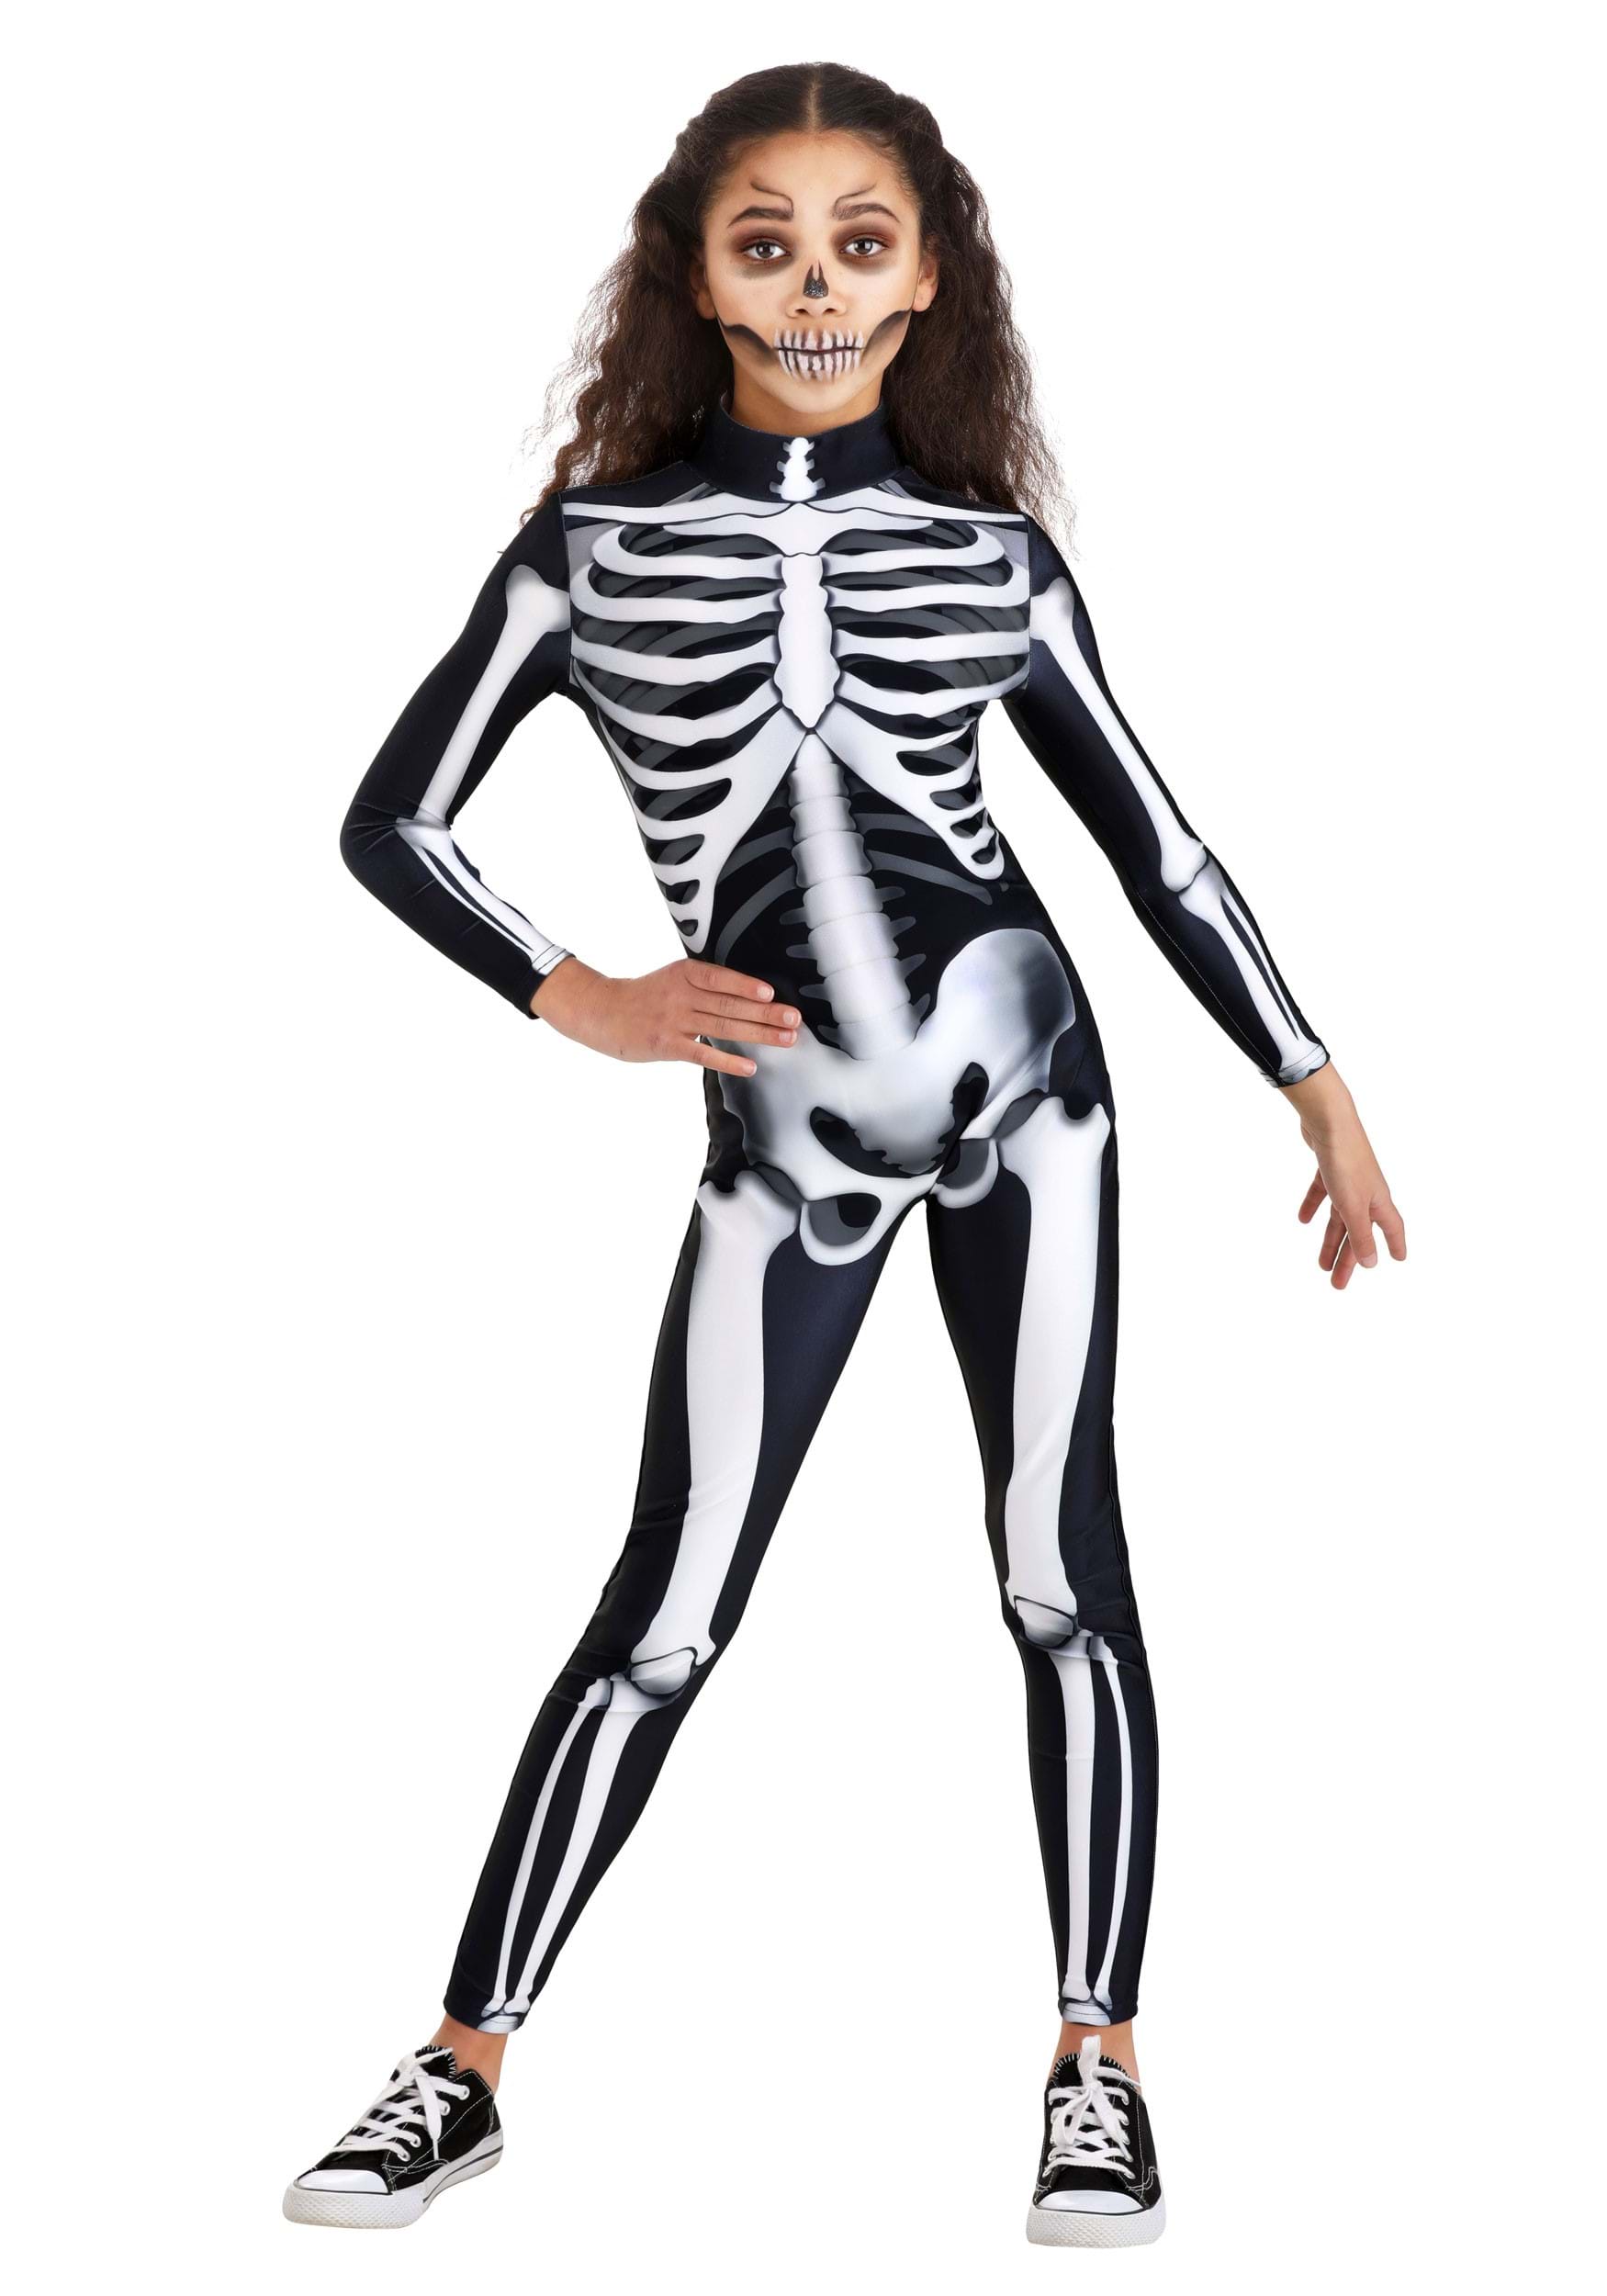 Sexy Halloween Costume for Adults, Women Halloween Costume, Halloween Bodysuit  Costume, Xray Sexy Skeleton Costume, Skeleton Bodysuit Women 